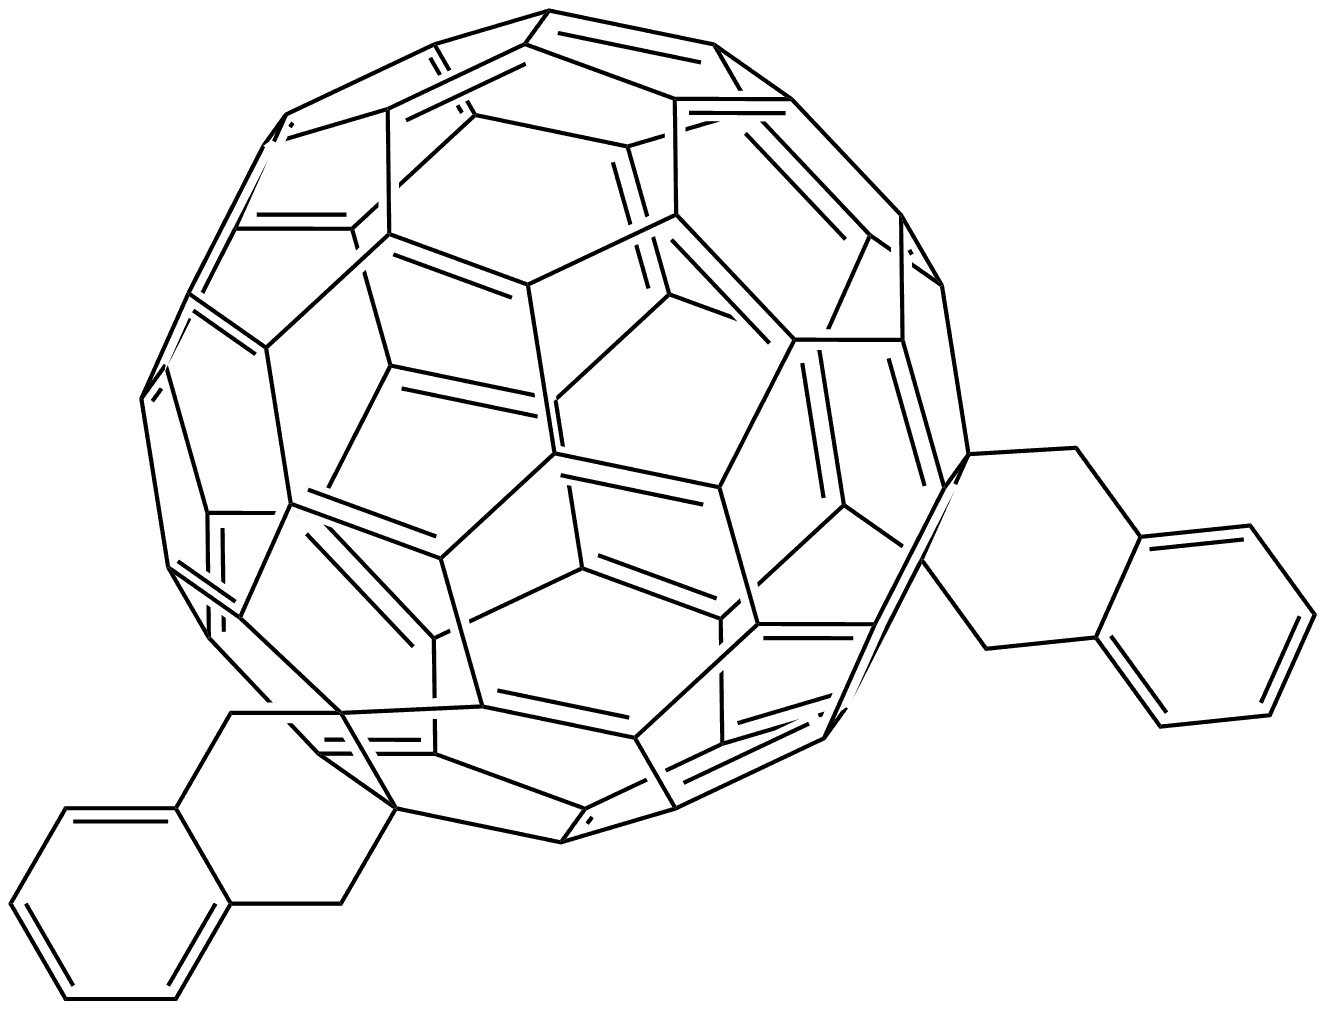 OXCBA Structure